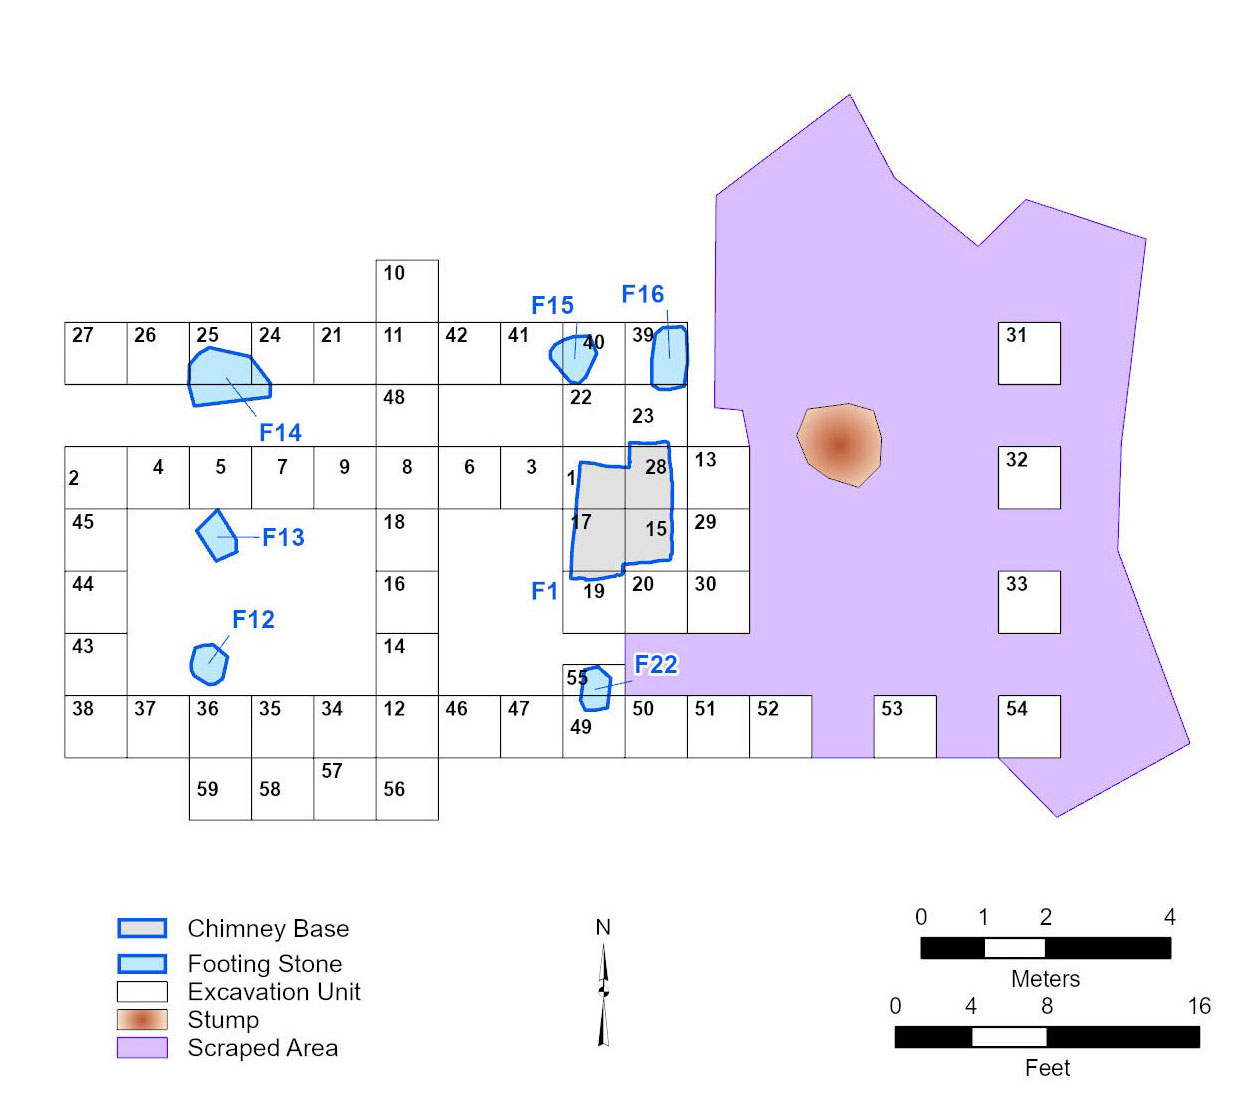 map of excavation unit layout - rows and columns of squares representing one-meter units adjacent to purple shape representing the scraped area.